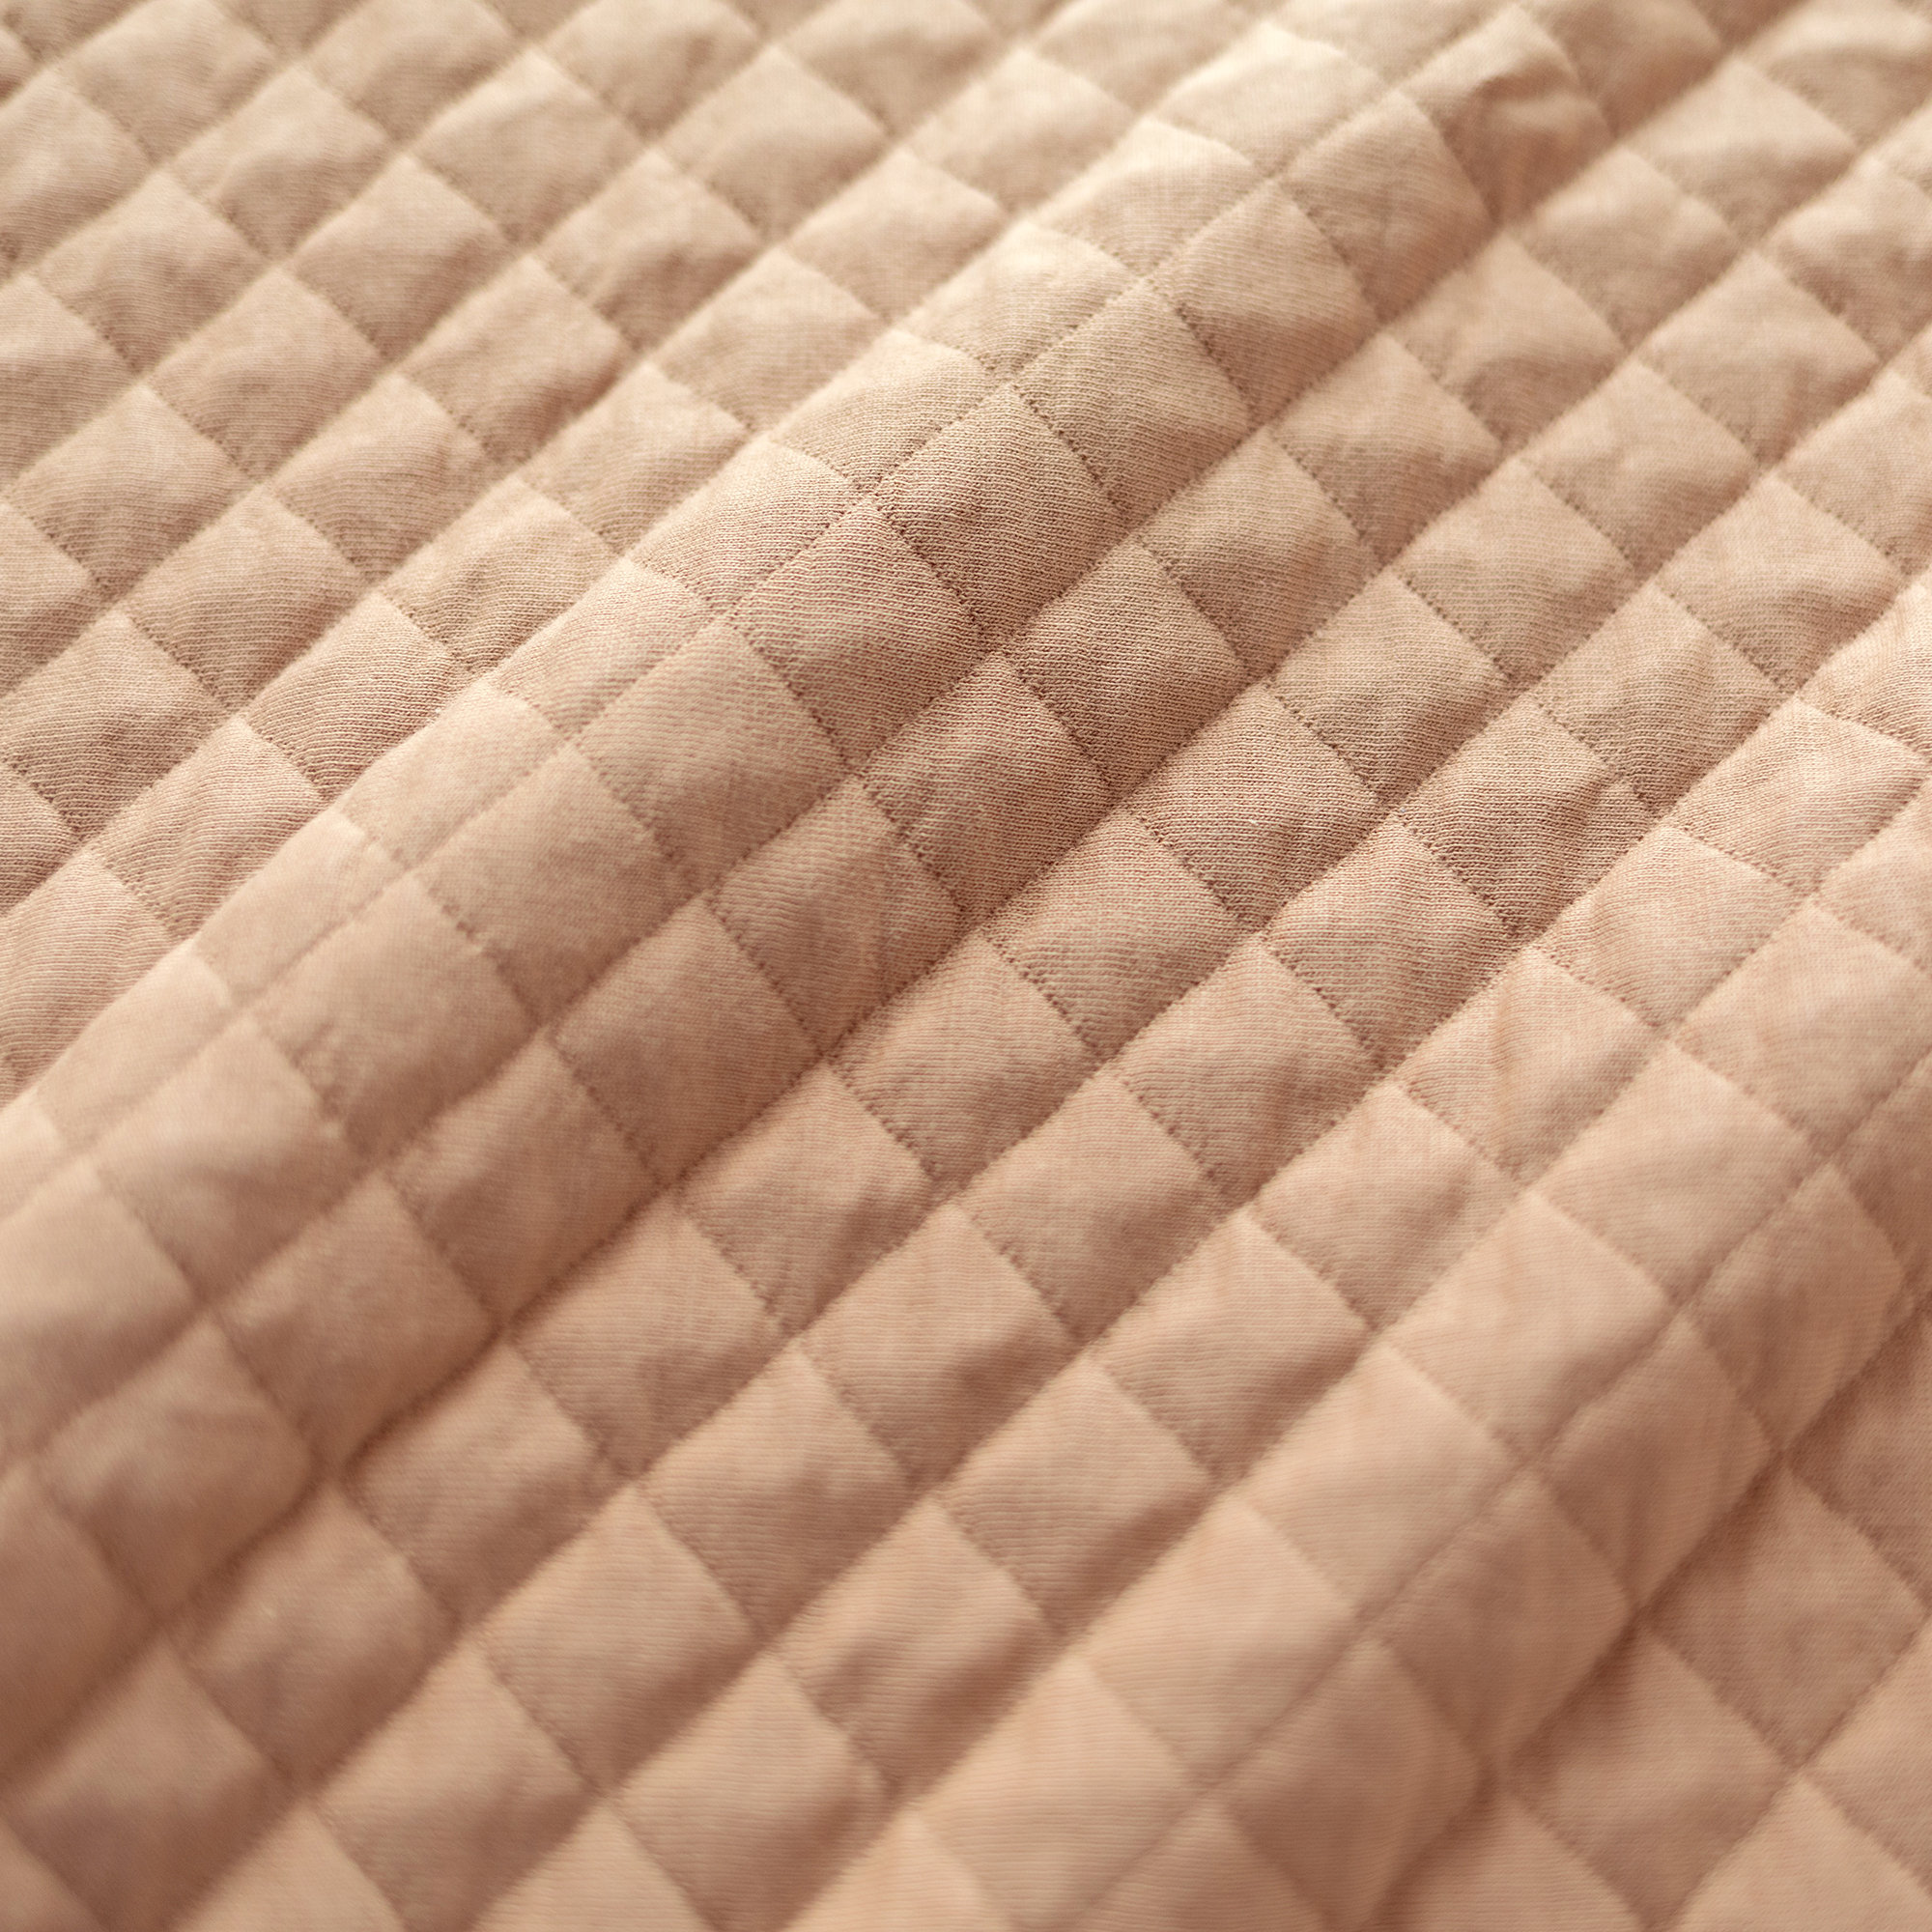 Manta Pady quilted jersey 75x100cm QUILT Beige tog 1.5